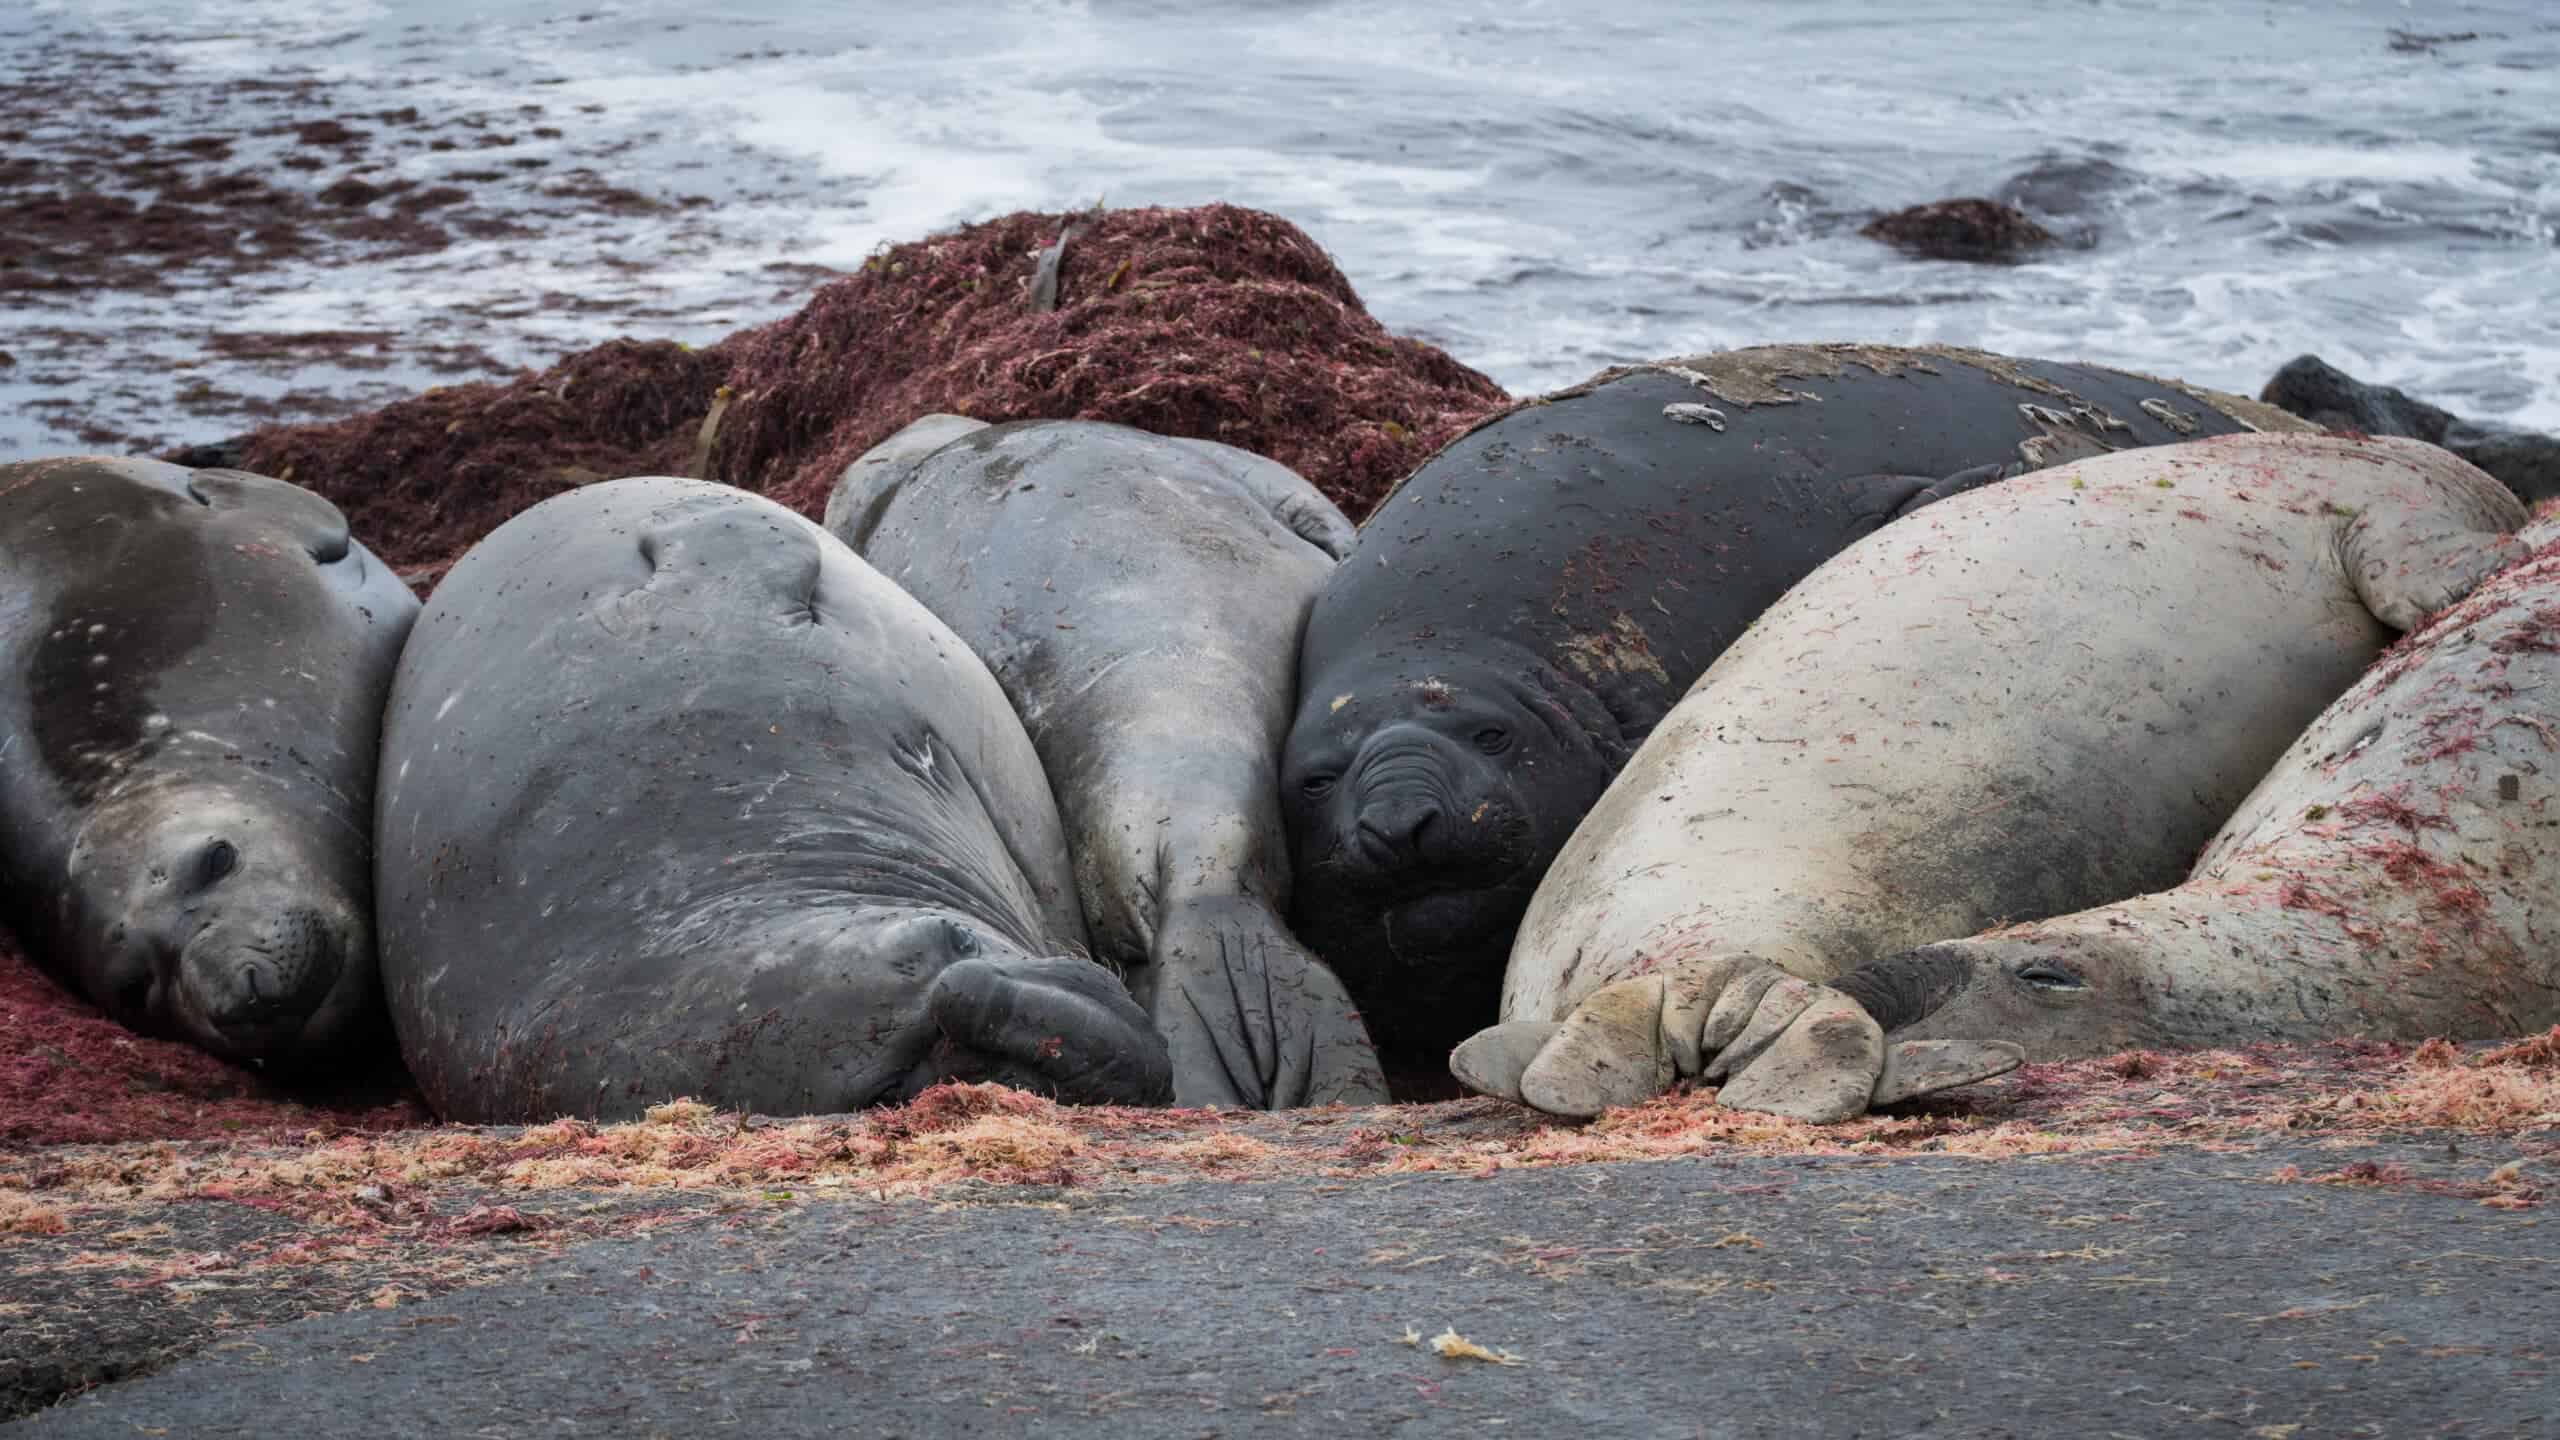 Multiple southern elephant seals